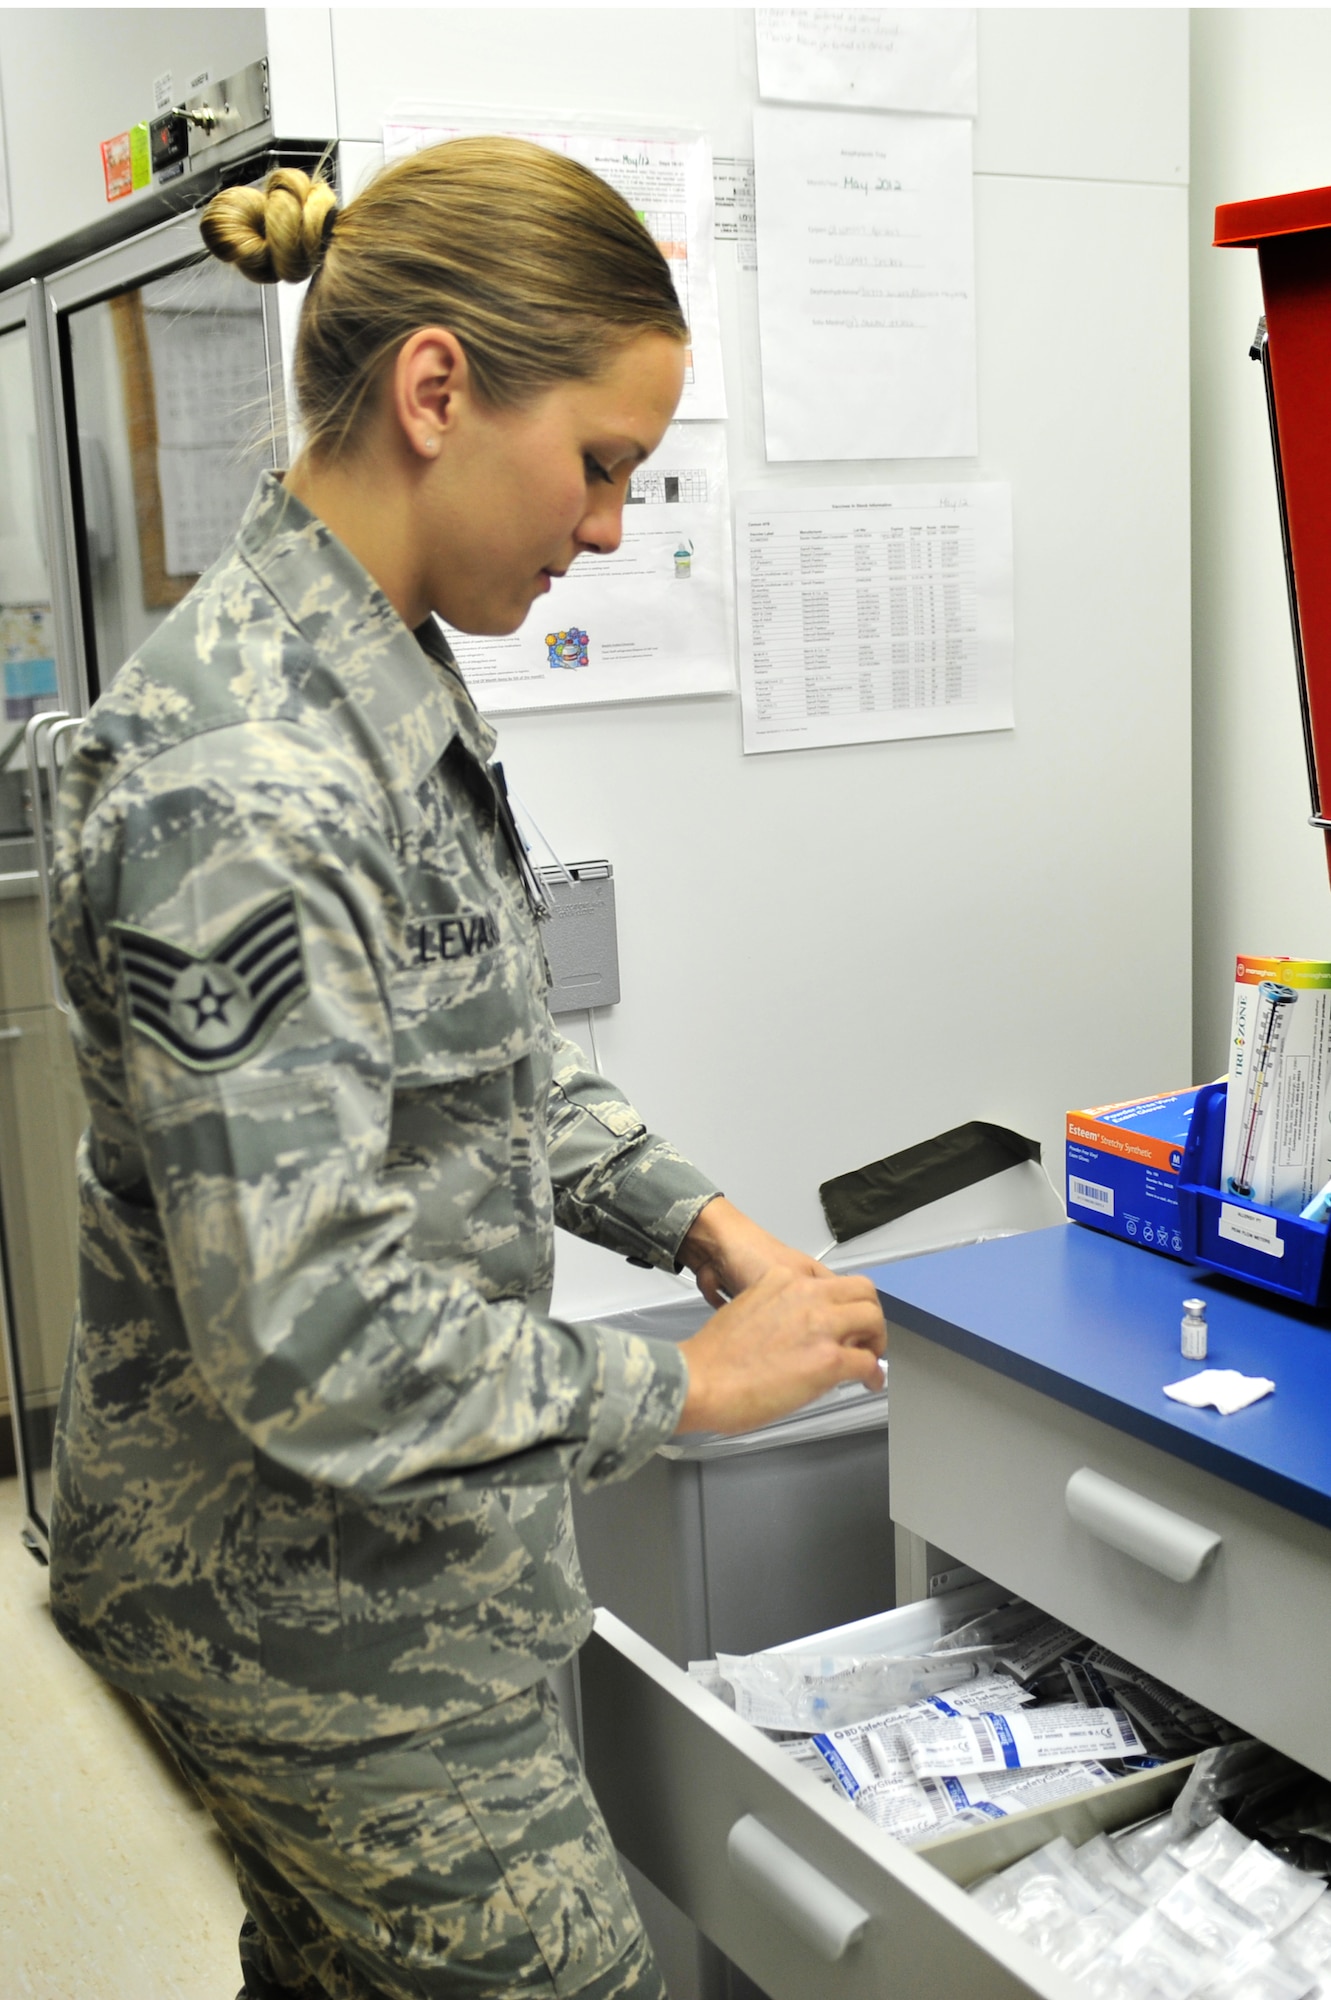 U.S. Air Force Staff Sgt. Dena Levari, 27th Special Operations Medical Operations Squadron NCOIC of immunizations, prepares a Tetanus, Diphtheria, Pertussis vaccination for a patient in the clinic at Cannon Air Force Base, N.M., May 29, 2012. The Tdap vaccine protects against those viruses that can cause illness like lockjaw and whooping cough. (U.S. Air Force photo by Airman 1st Class Alexxis Pons Abascal)  